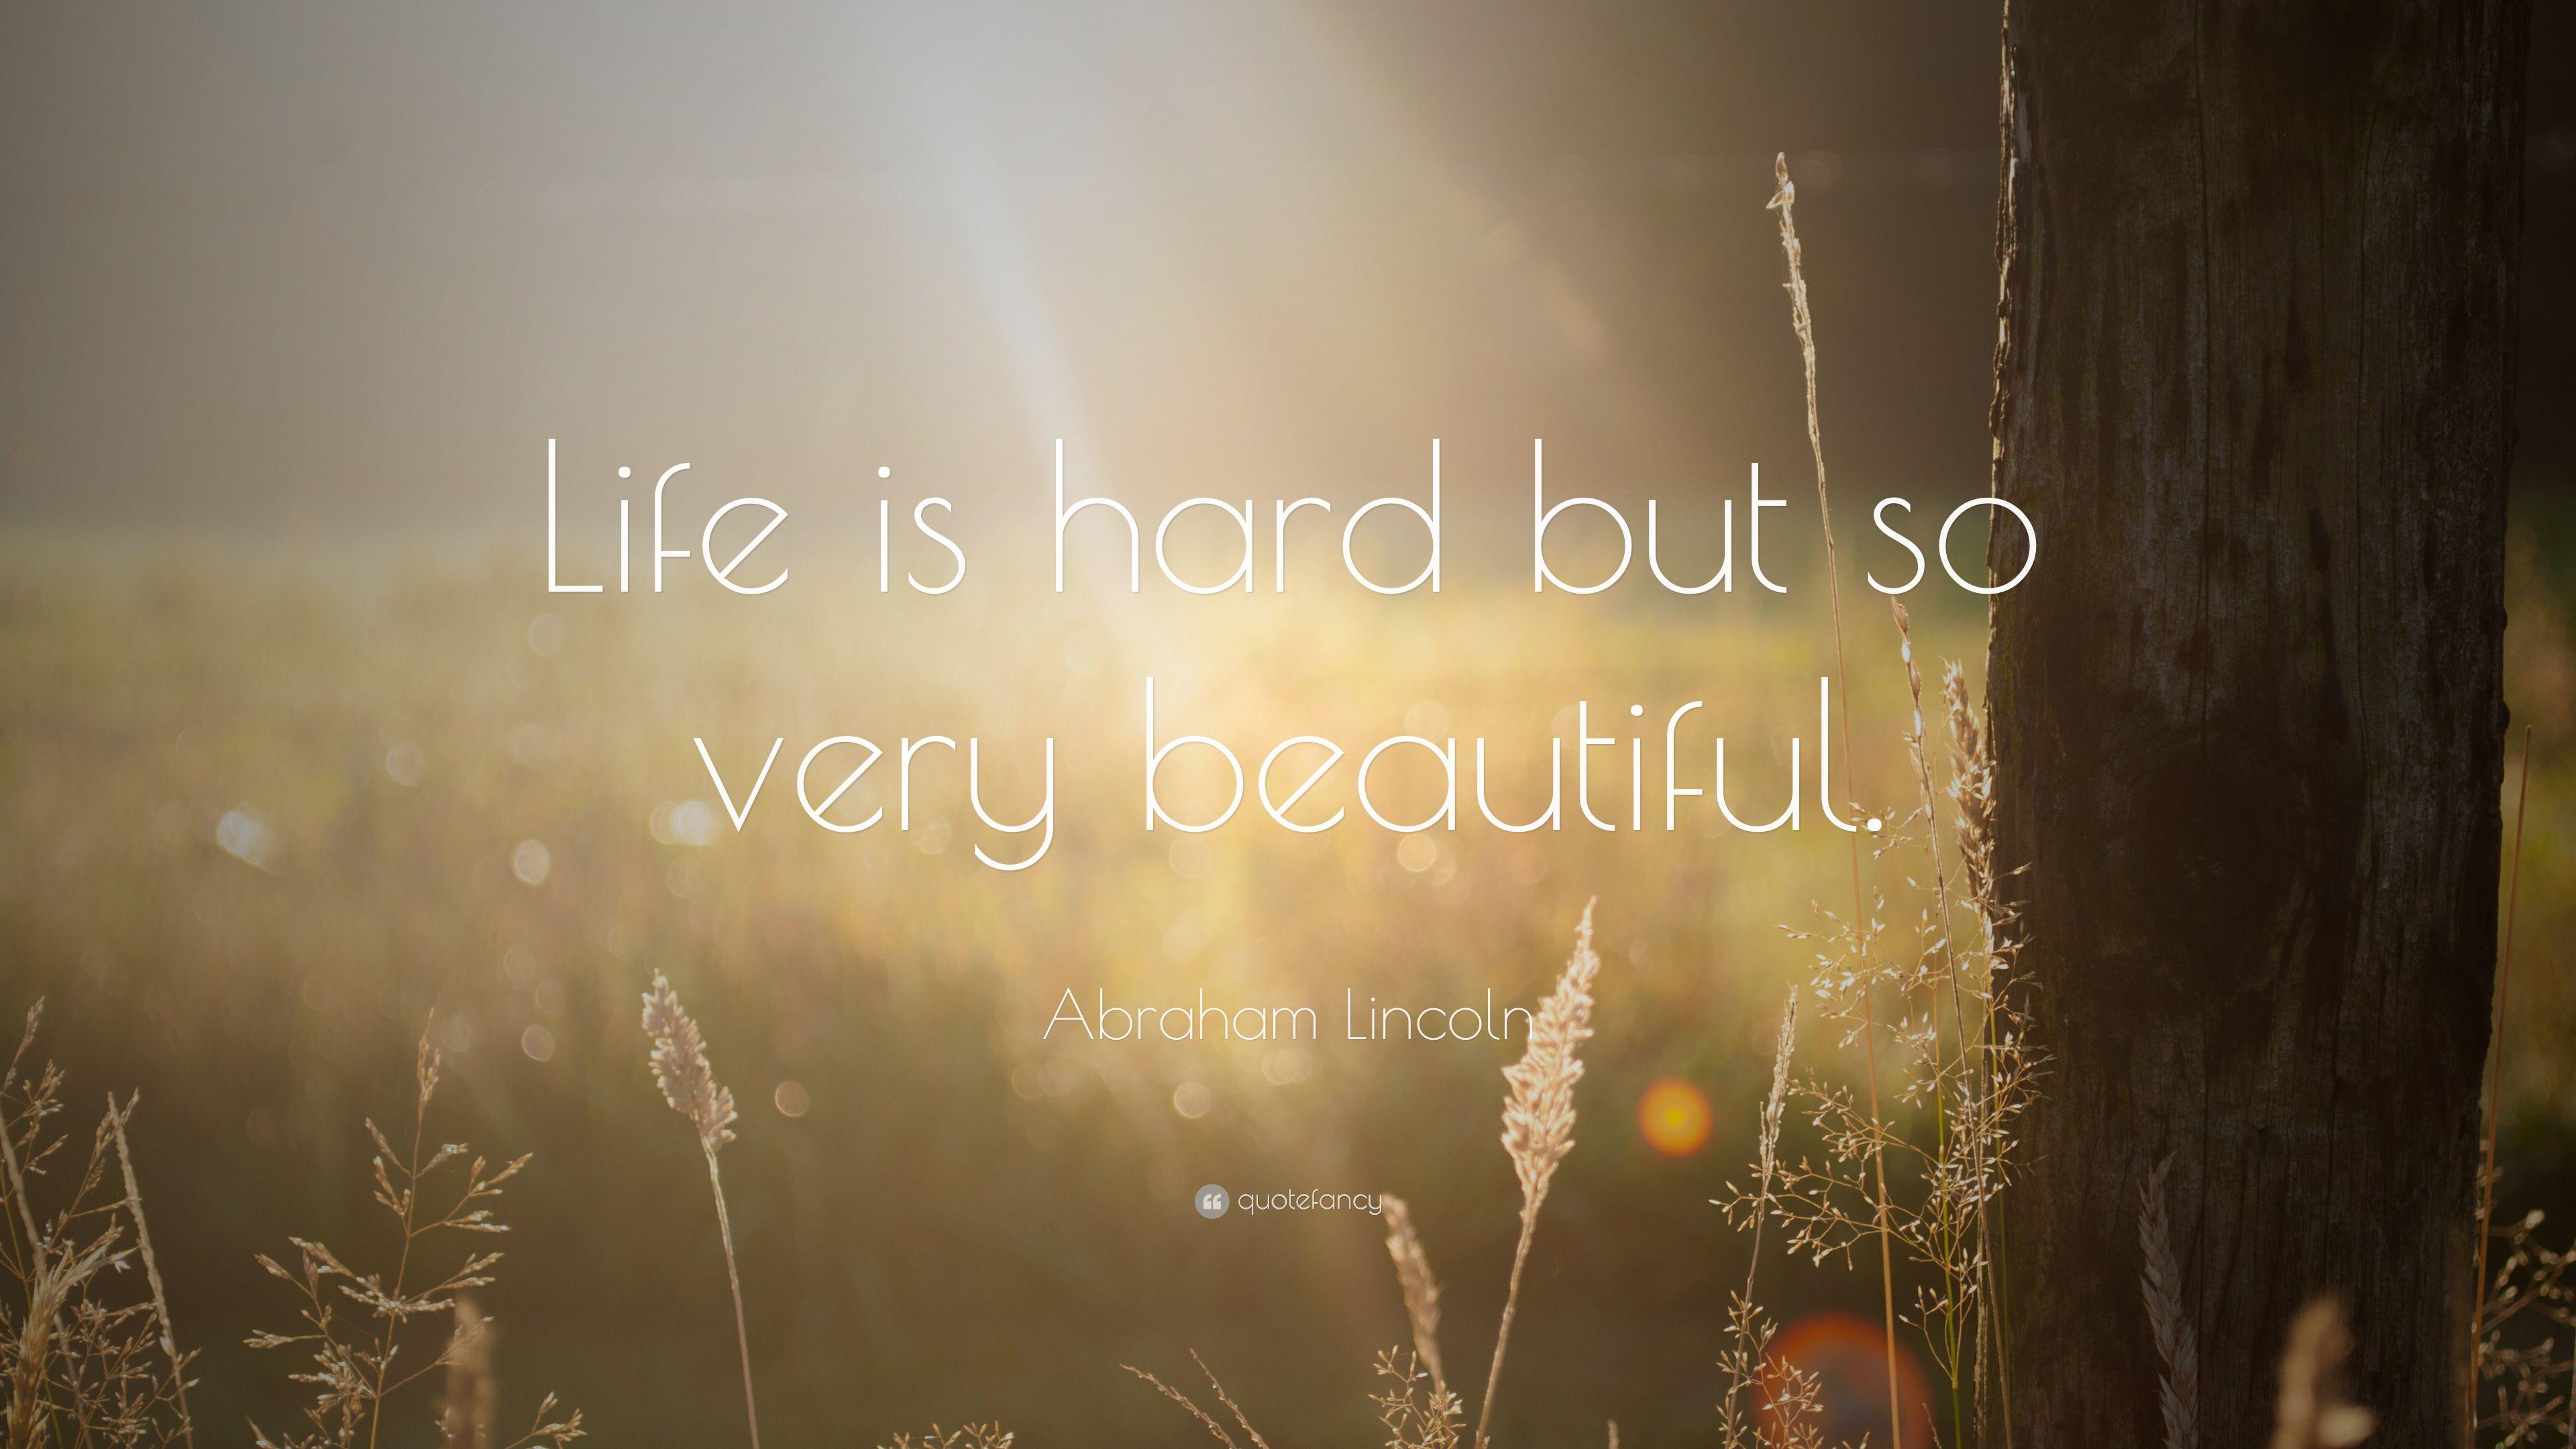 Abraham Lincoln Quote: “Life is hard but so very beautiful.” 28